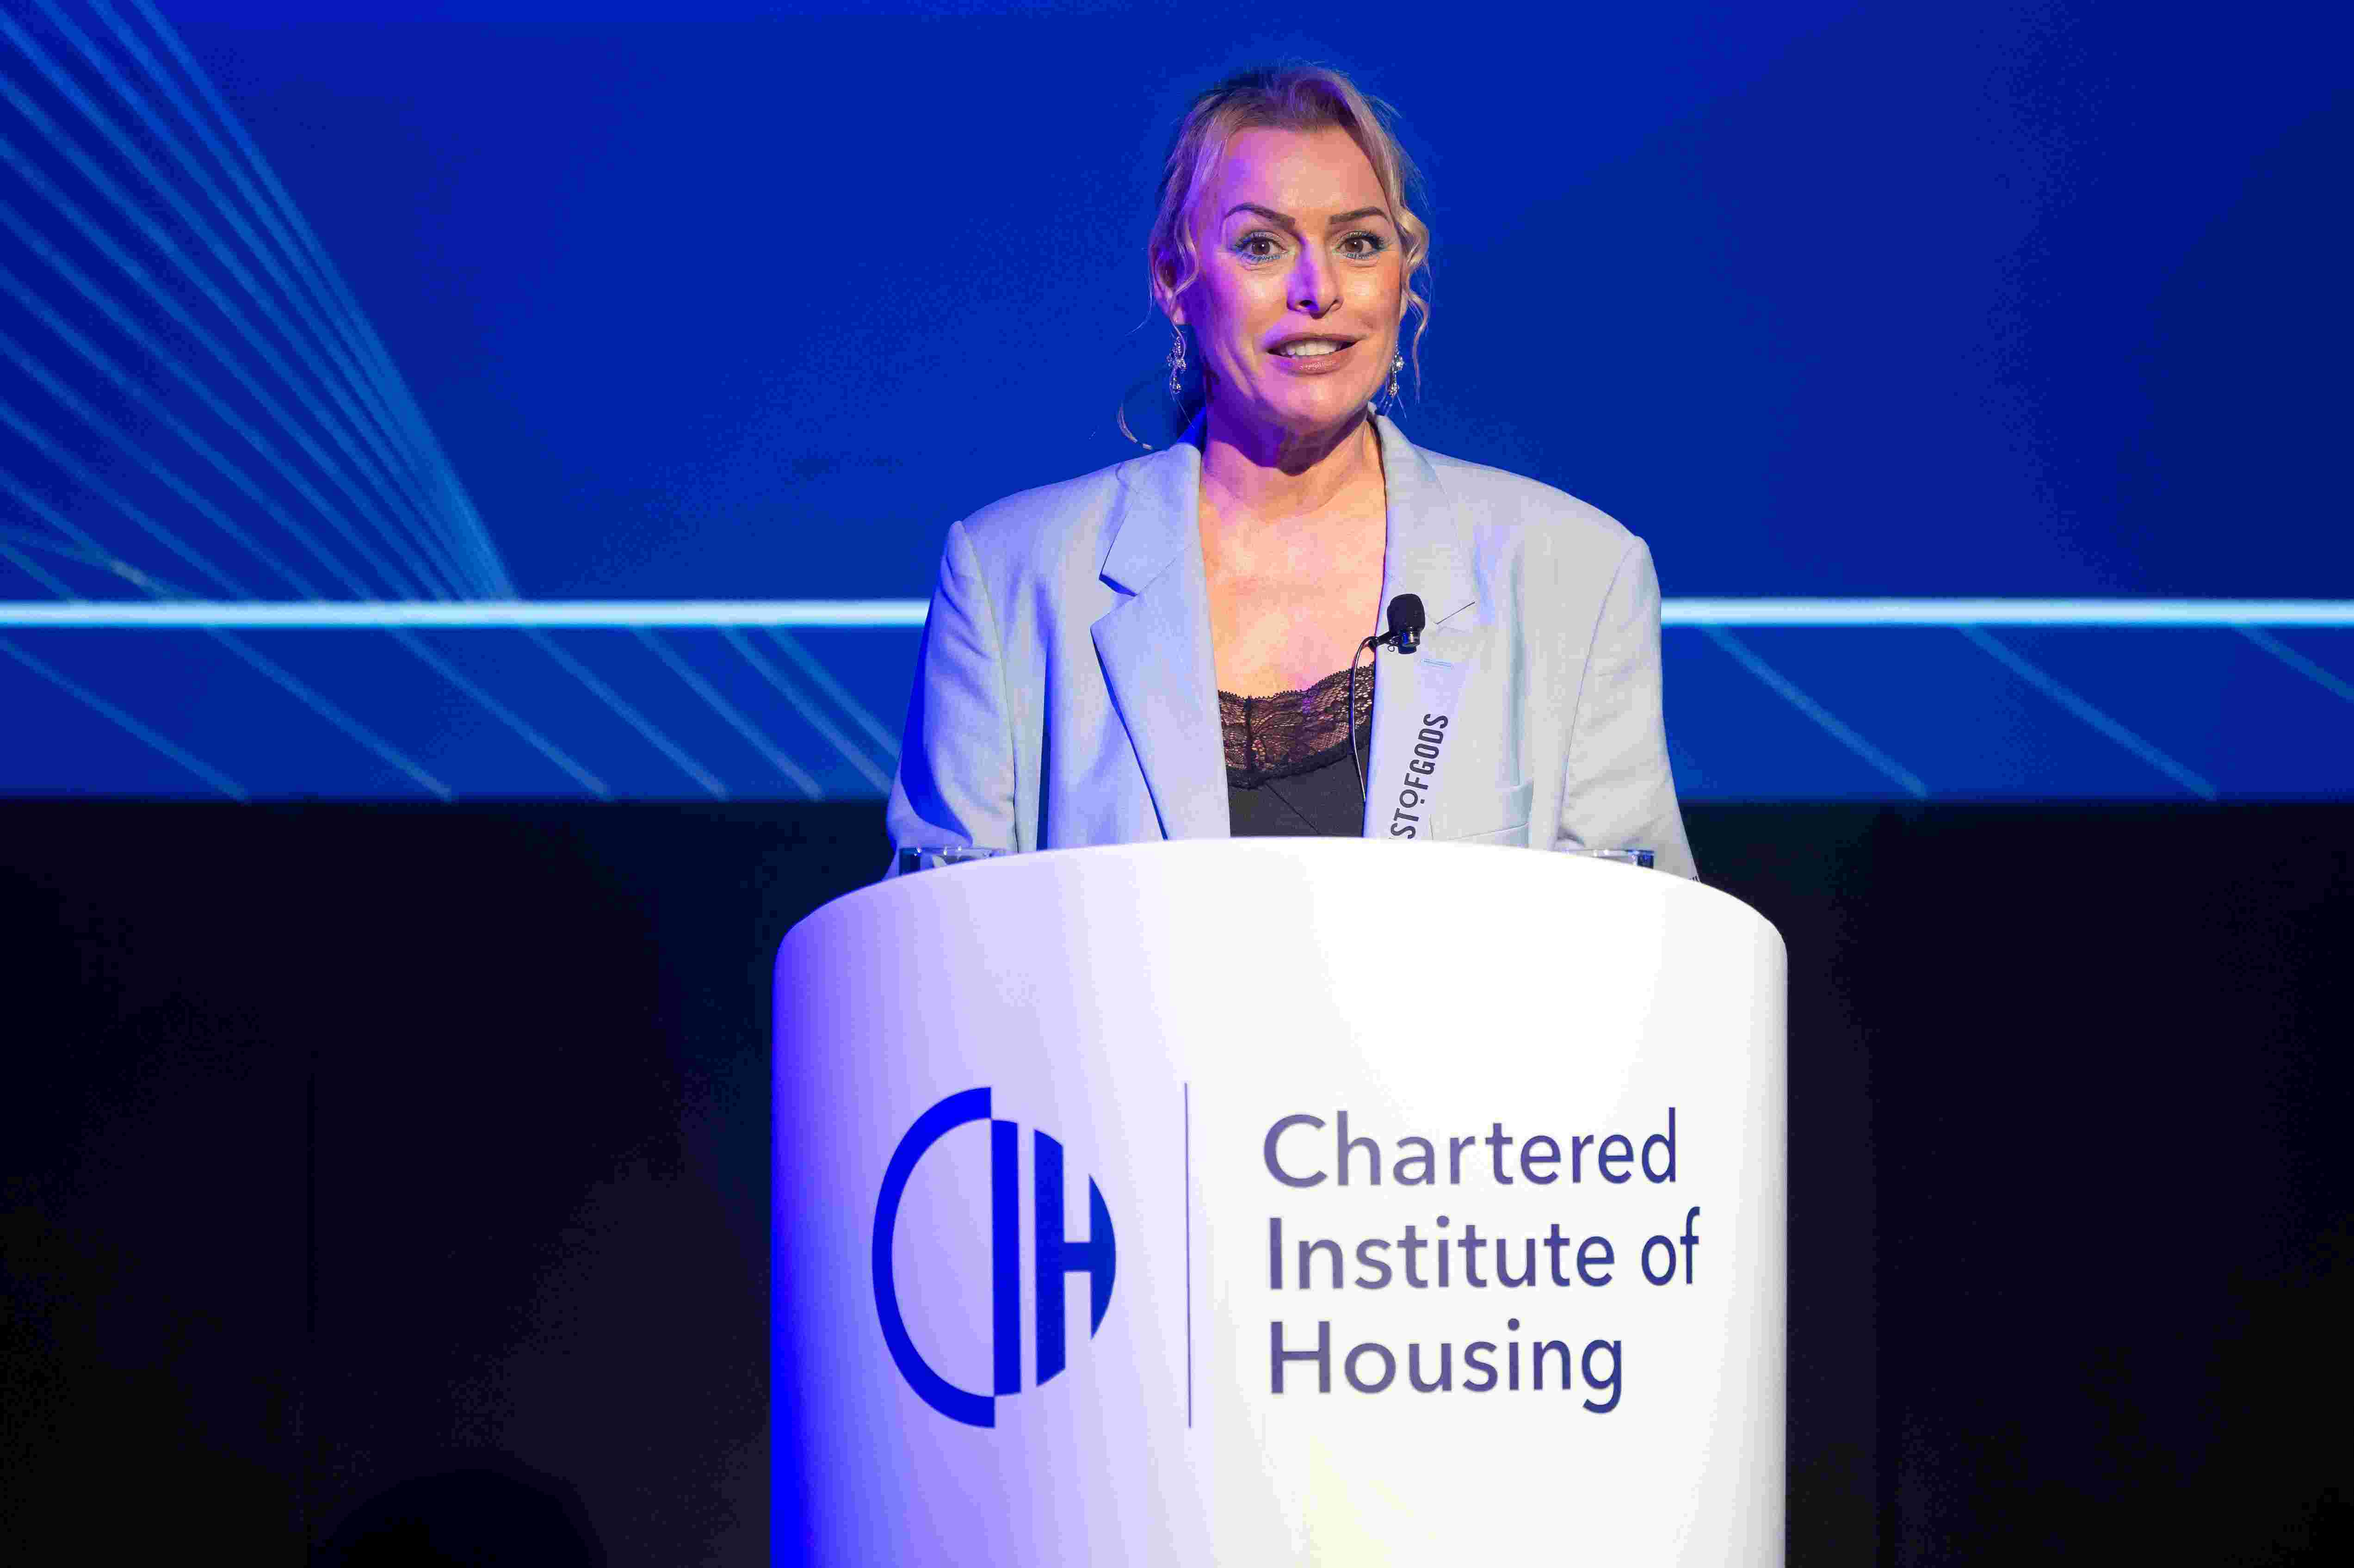 Jill Murray delivers EPIC reminder of the power of housing to create change at CIH Presidential Address